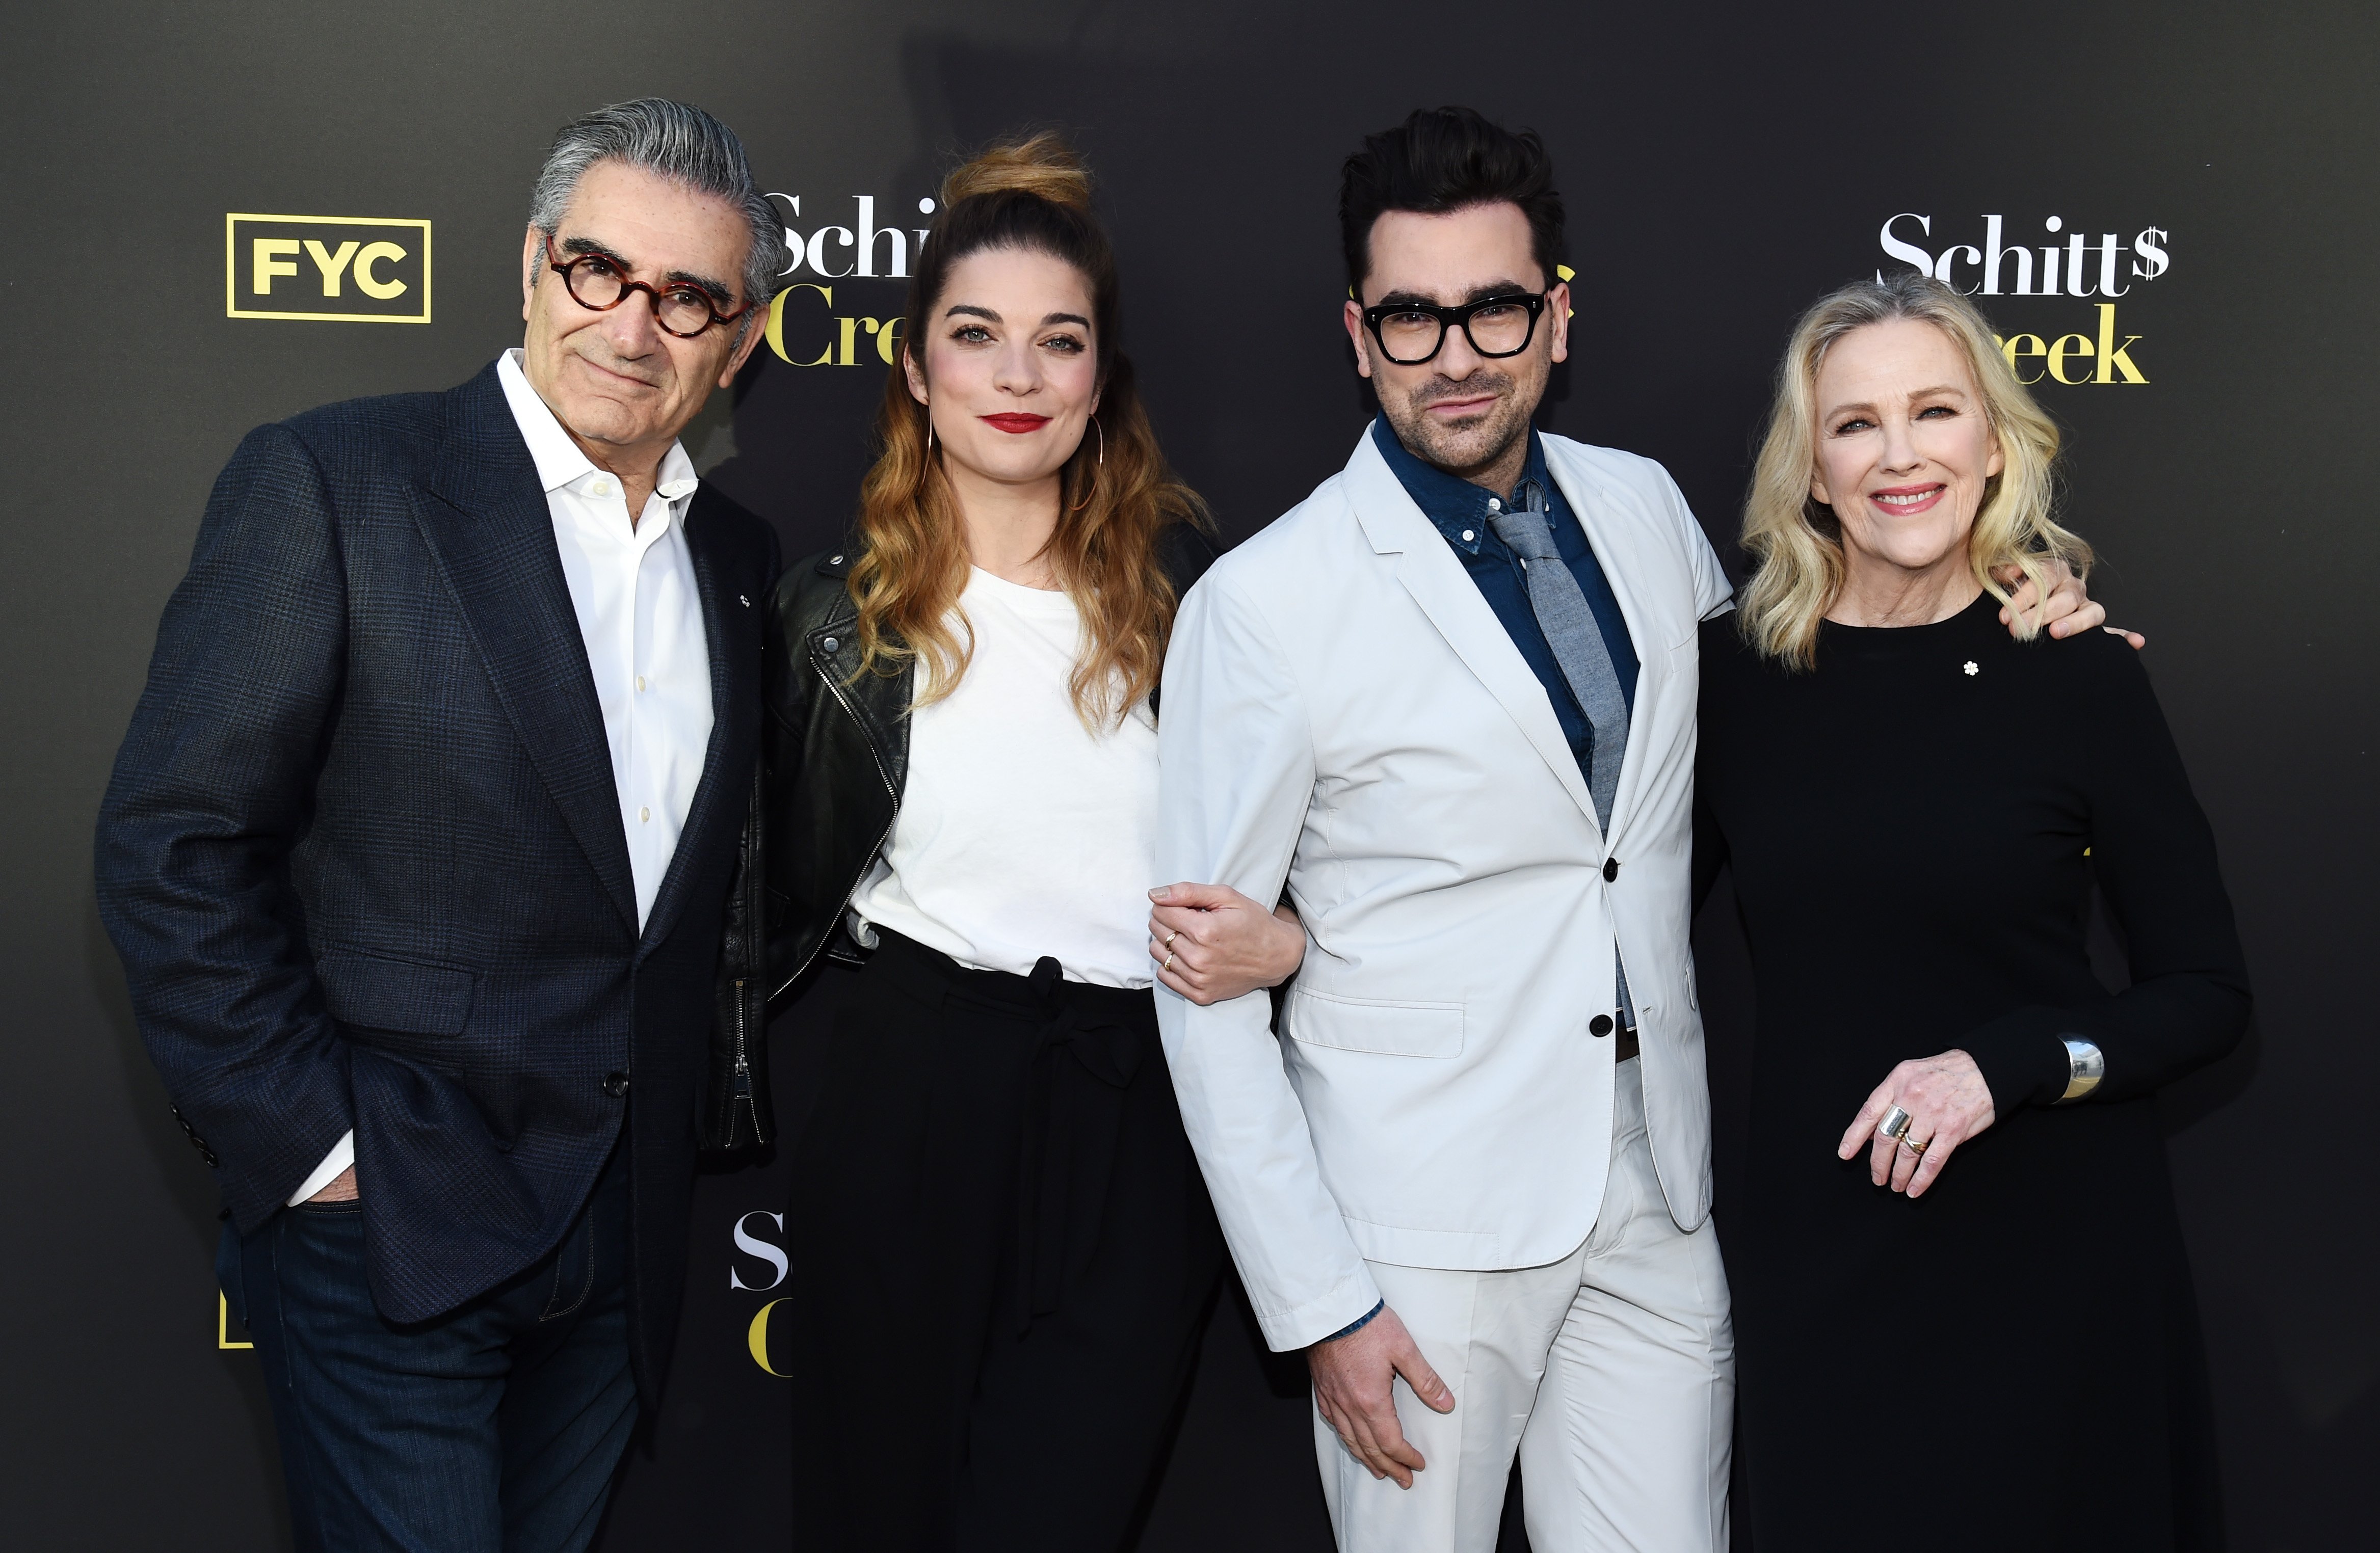 Schitt's Creek cast members Eugene Levy, Annie Murphy, Dan Levy, and Catherine O'Hara pose at a screening